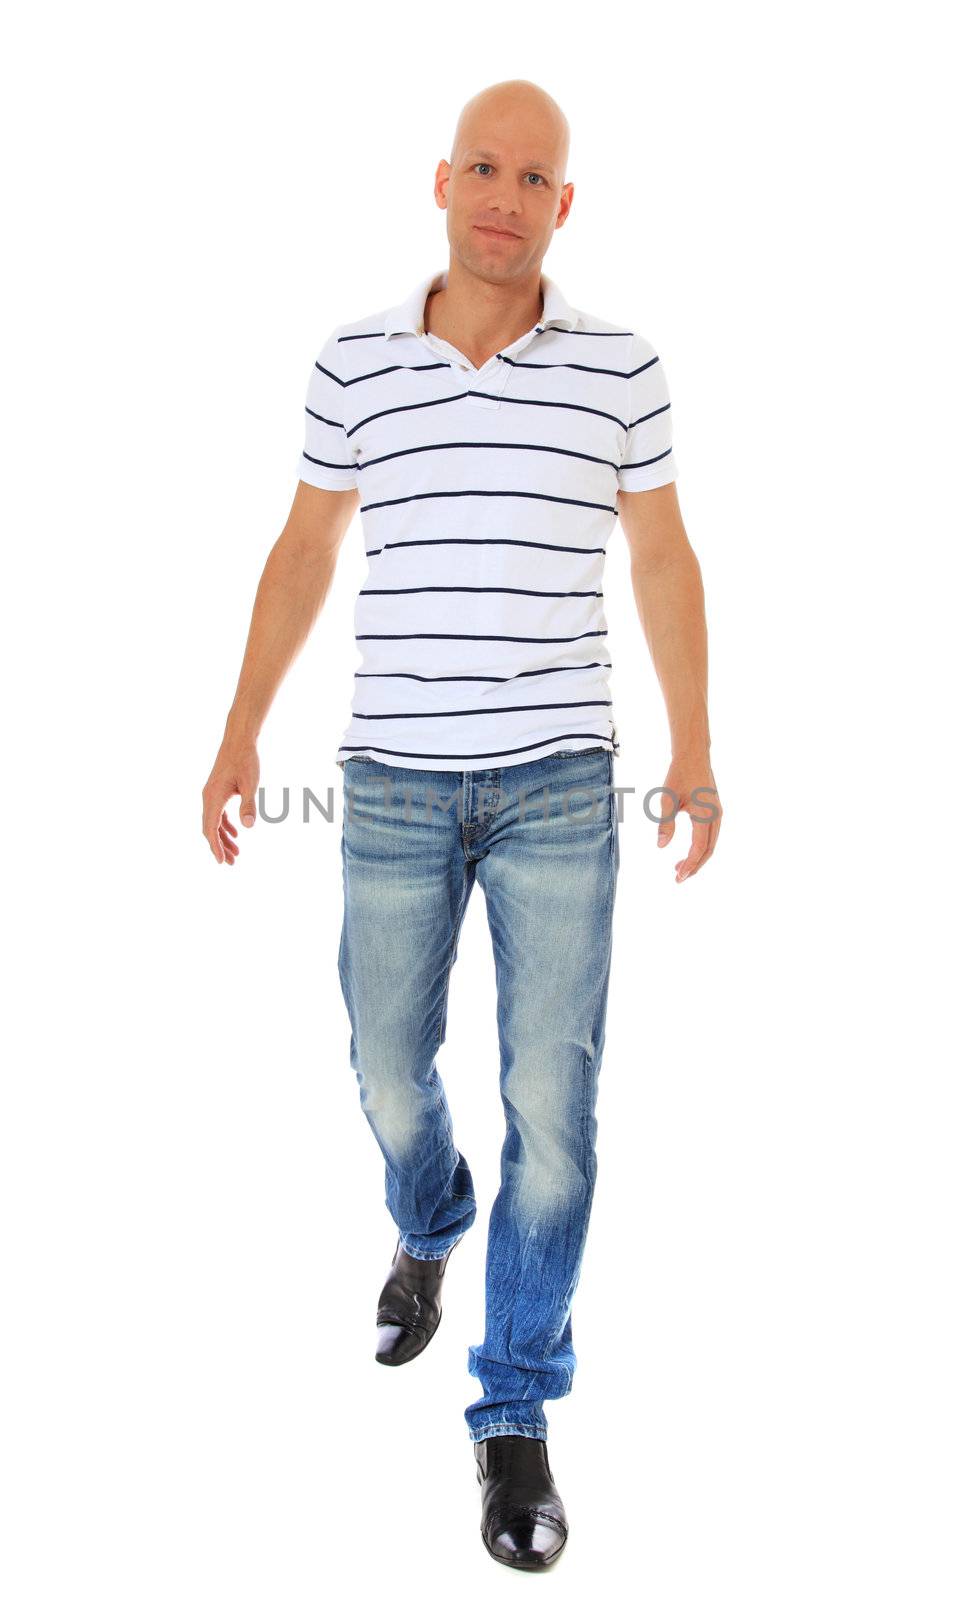 Full length shot of an attractive man walking. All on white background.